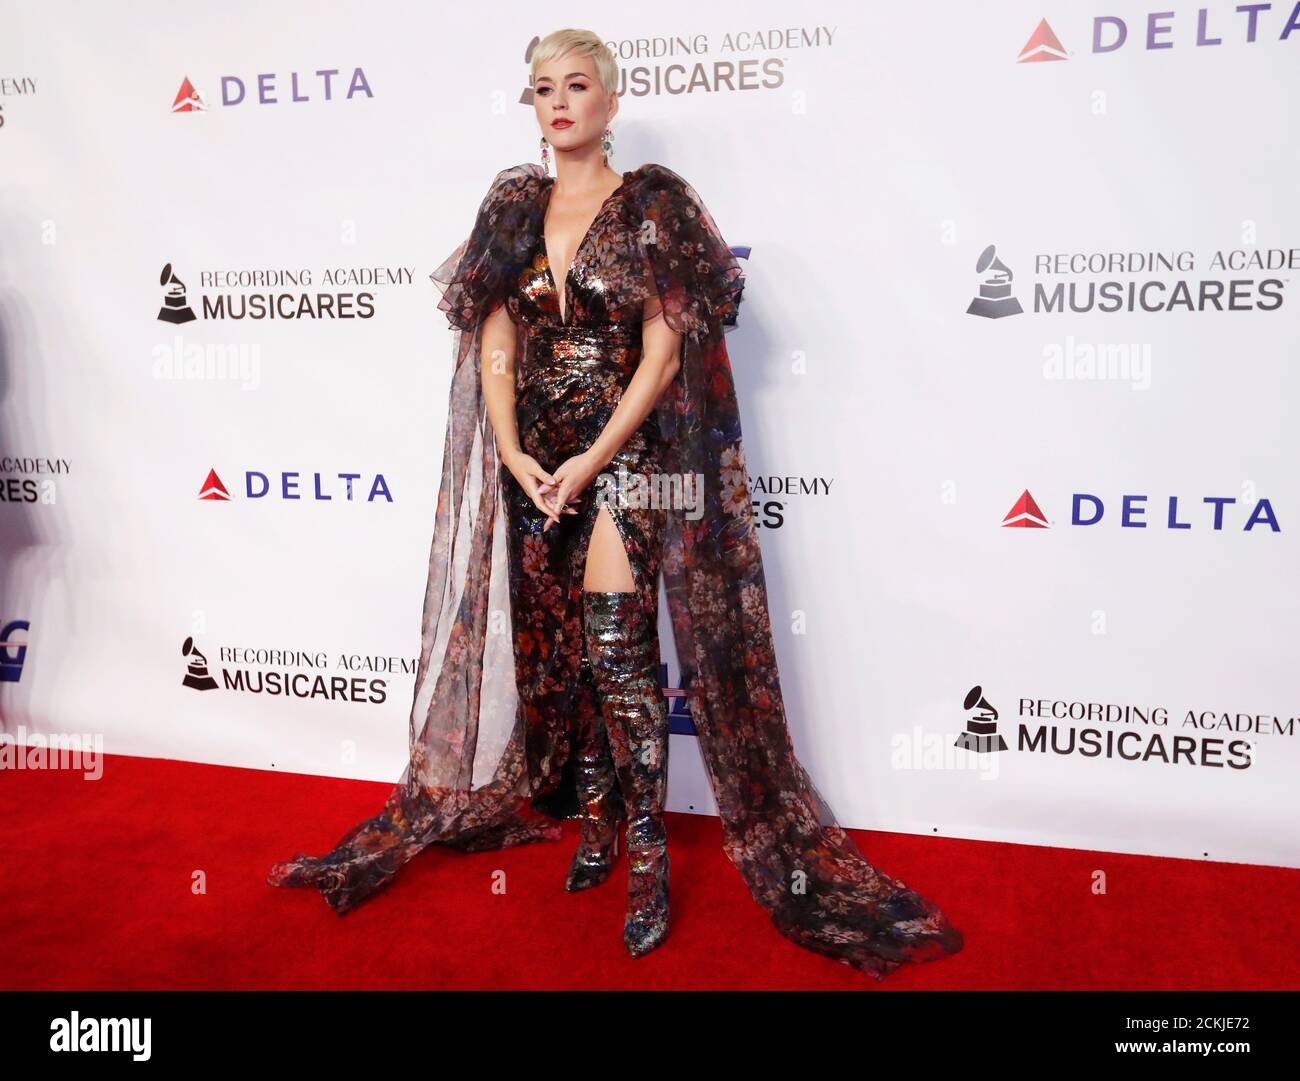 Page 2 - Katy Perry Red Carpet Event High Resolution Stock Photography and  Images - Alamy